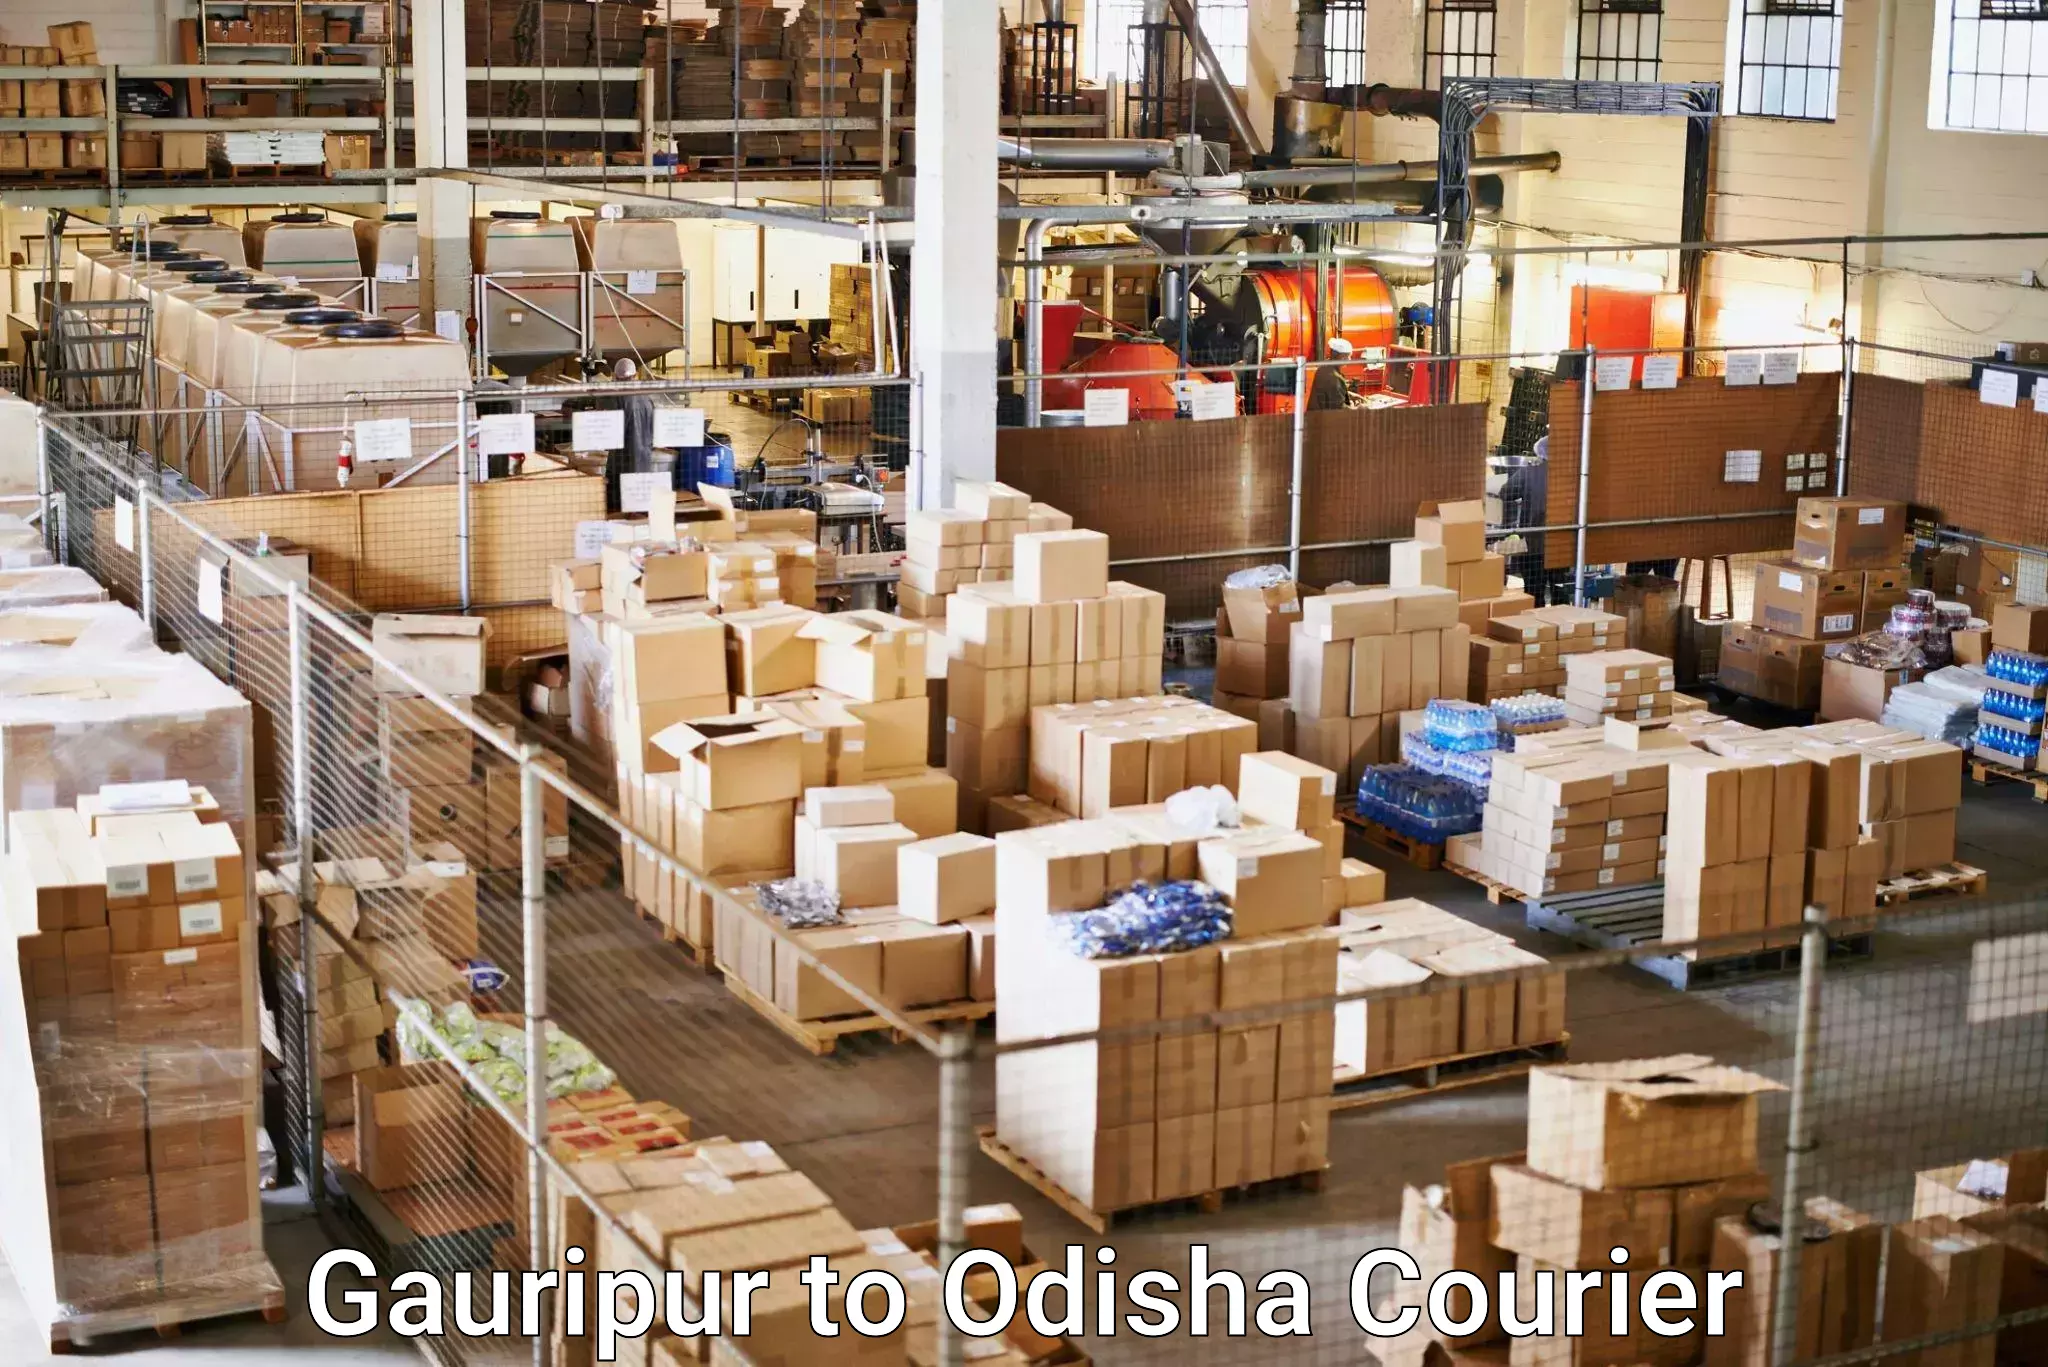 Cargo delivery service Gauripur to Kodala